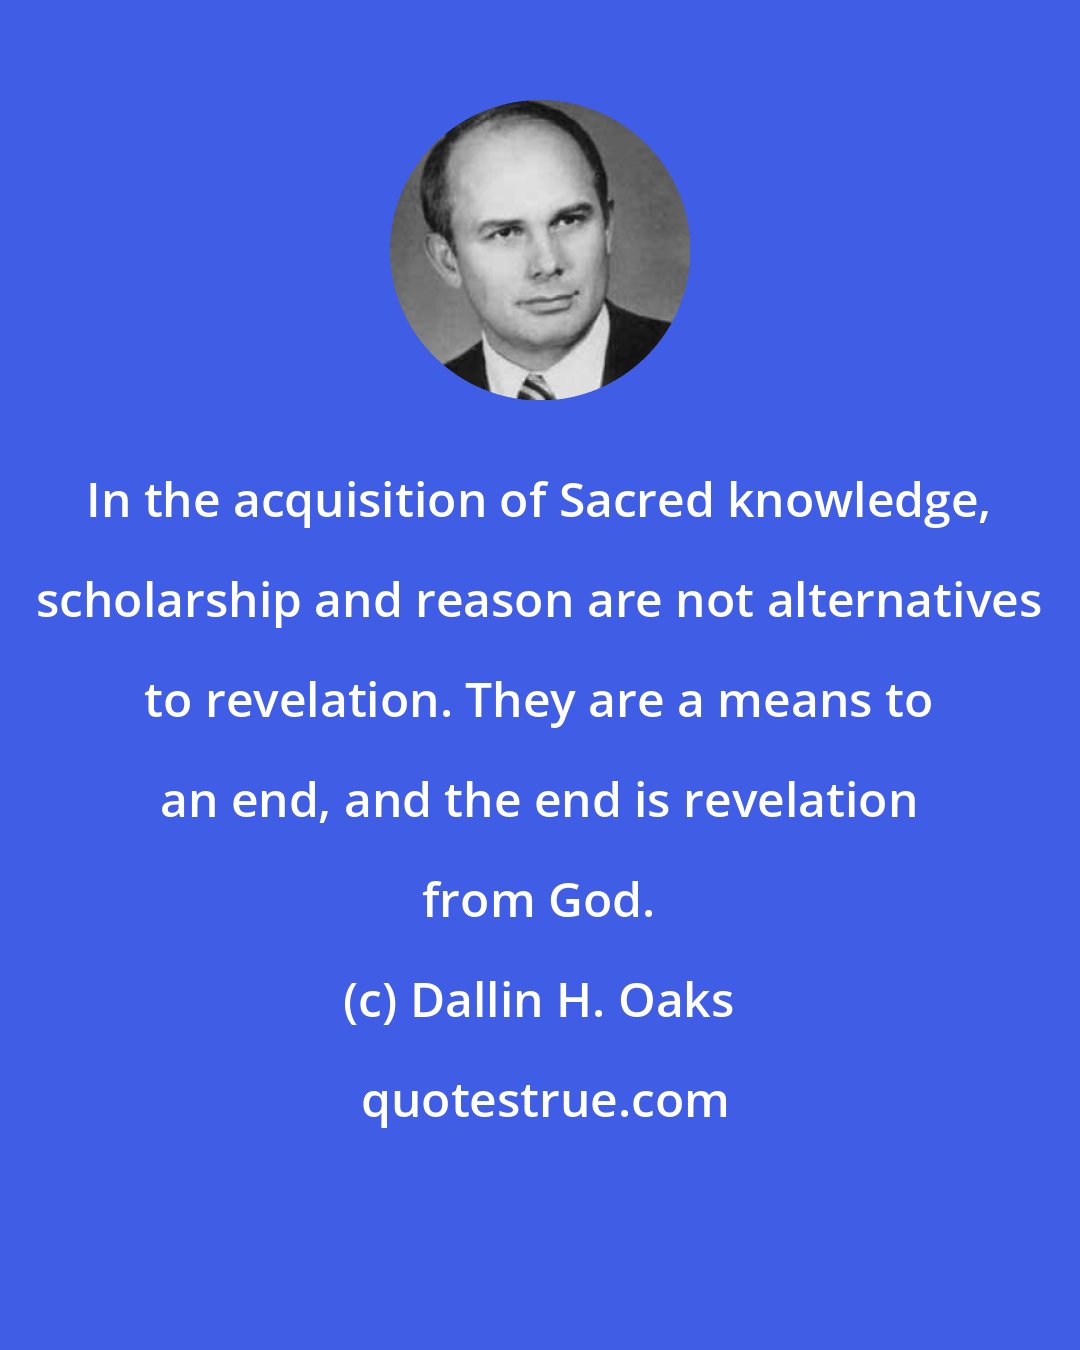 Dallin H. Oaks: In the acquisition of Sacred knowledge, scholarship and reason are not alternatives to revelation. They are a means to an end, and the end is revelation from God.